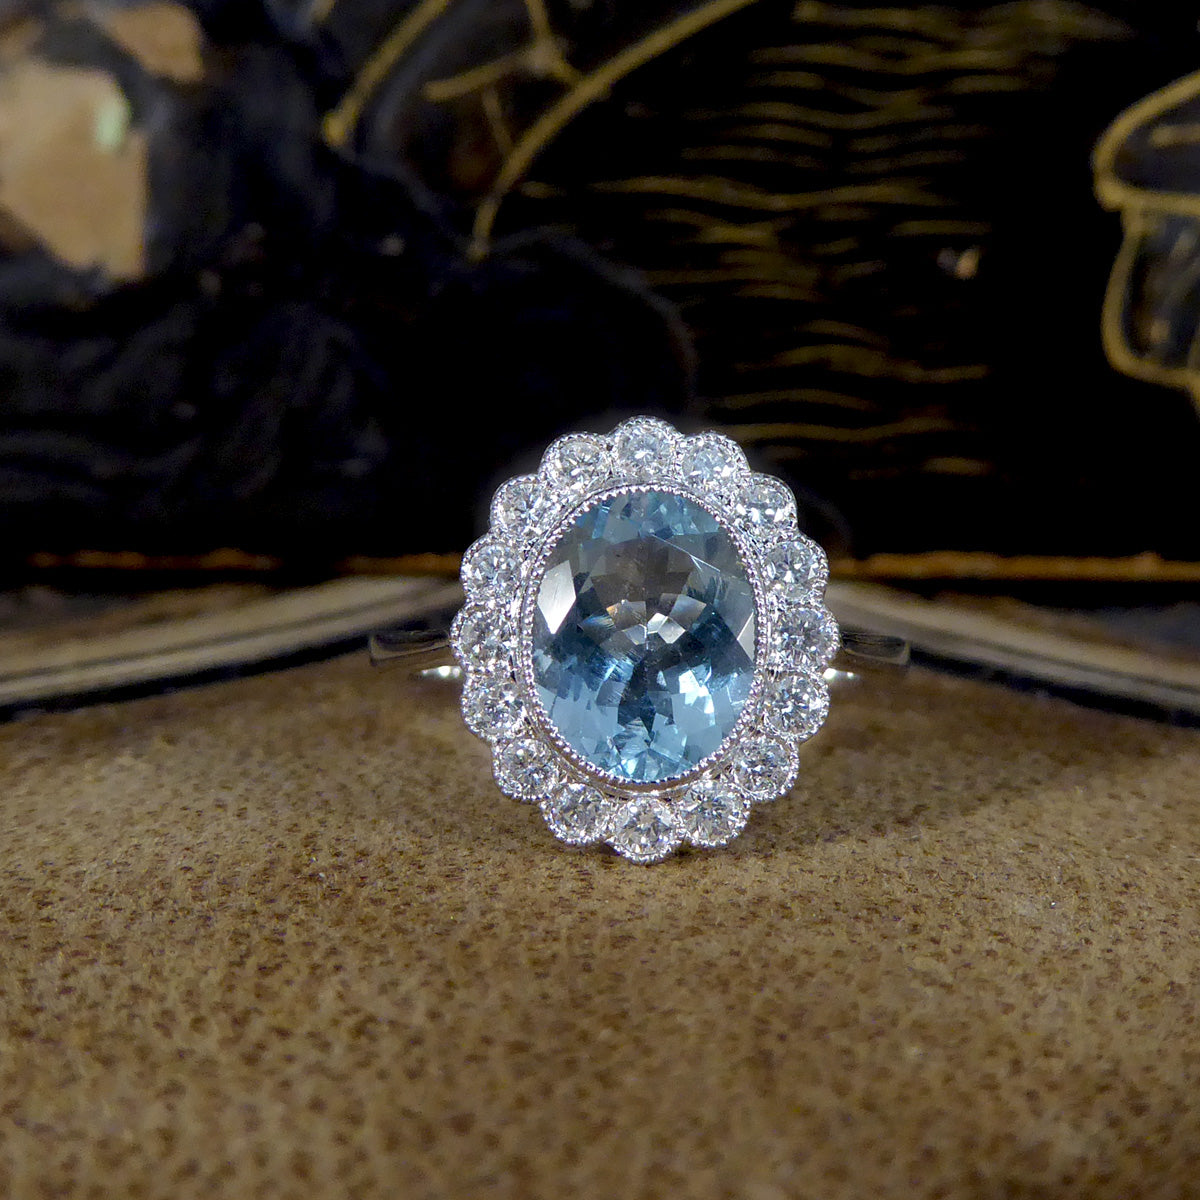 Vintage style 1.69ct Aquamarine and Diamond Cluster Ring in 18ct White Gold